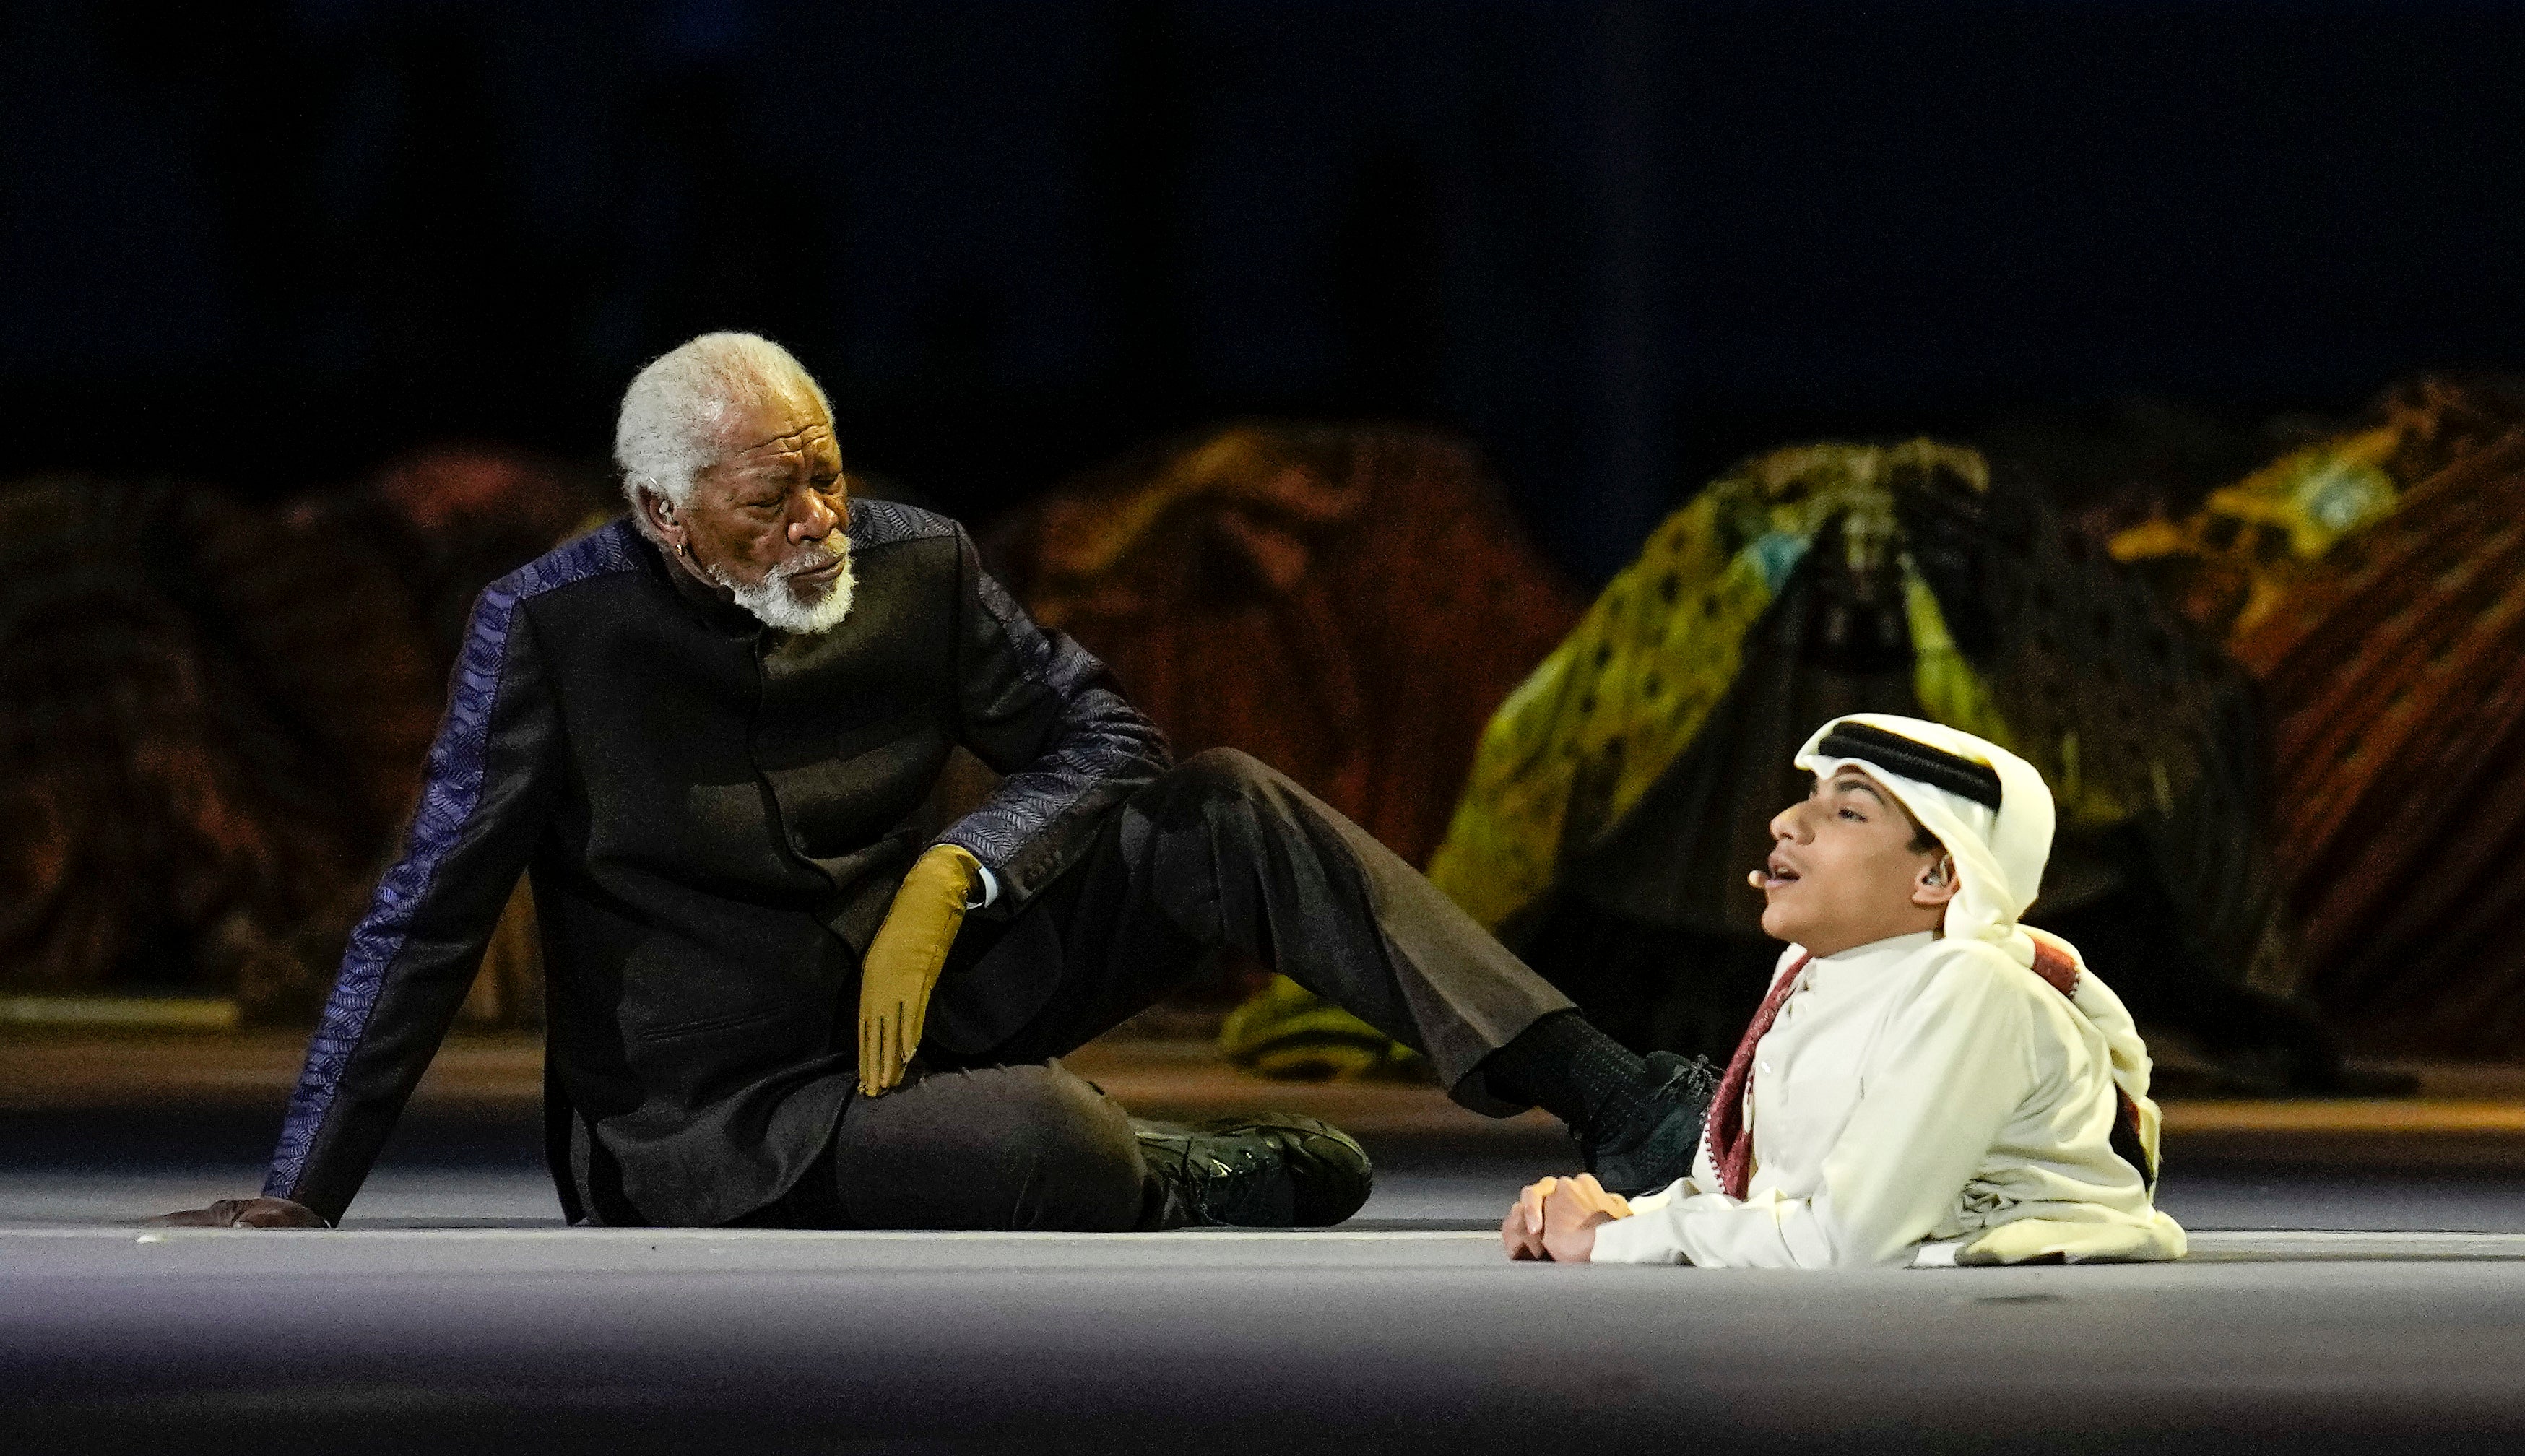 Freeman criticised for opening Fifa World Cup ceremony in Qatar